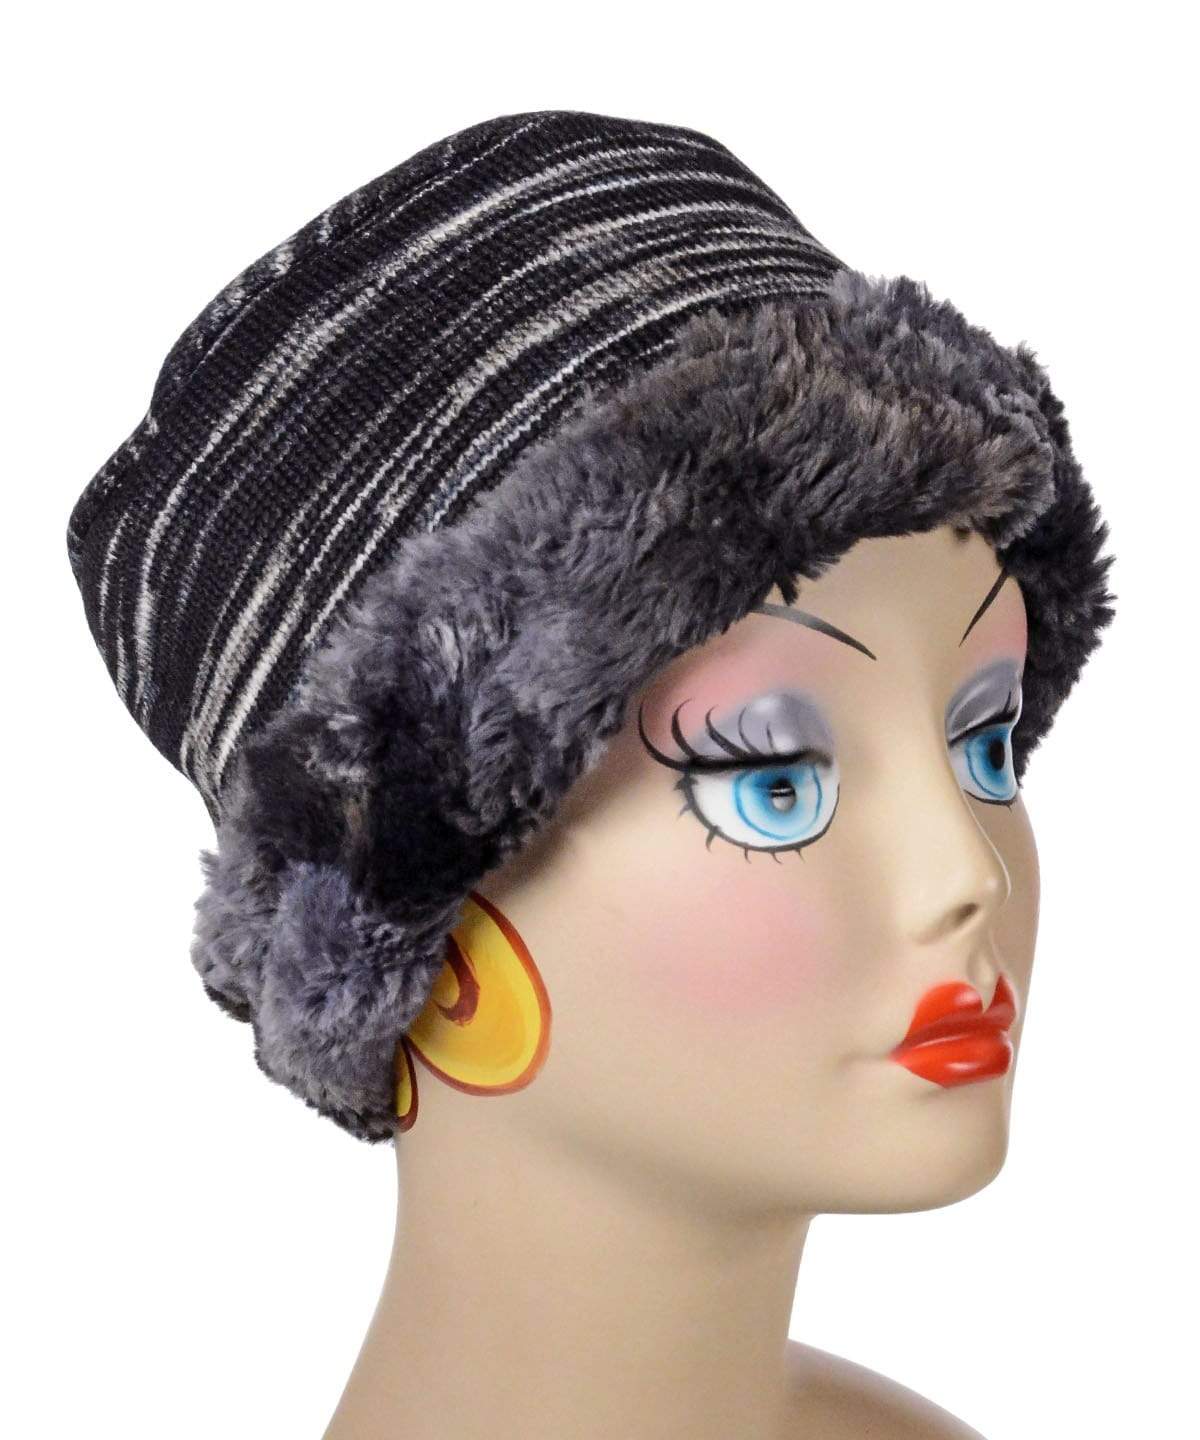 Pandemonium Millinery Cuffed Pillbox, Reversible (Two-Tone) - Sweet Stripes in Blackberry Cobbler with Assorted Faux Fur Medium / Blackberry Cobbler / Highland in Skye Hats